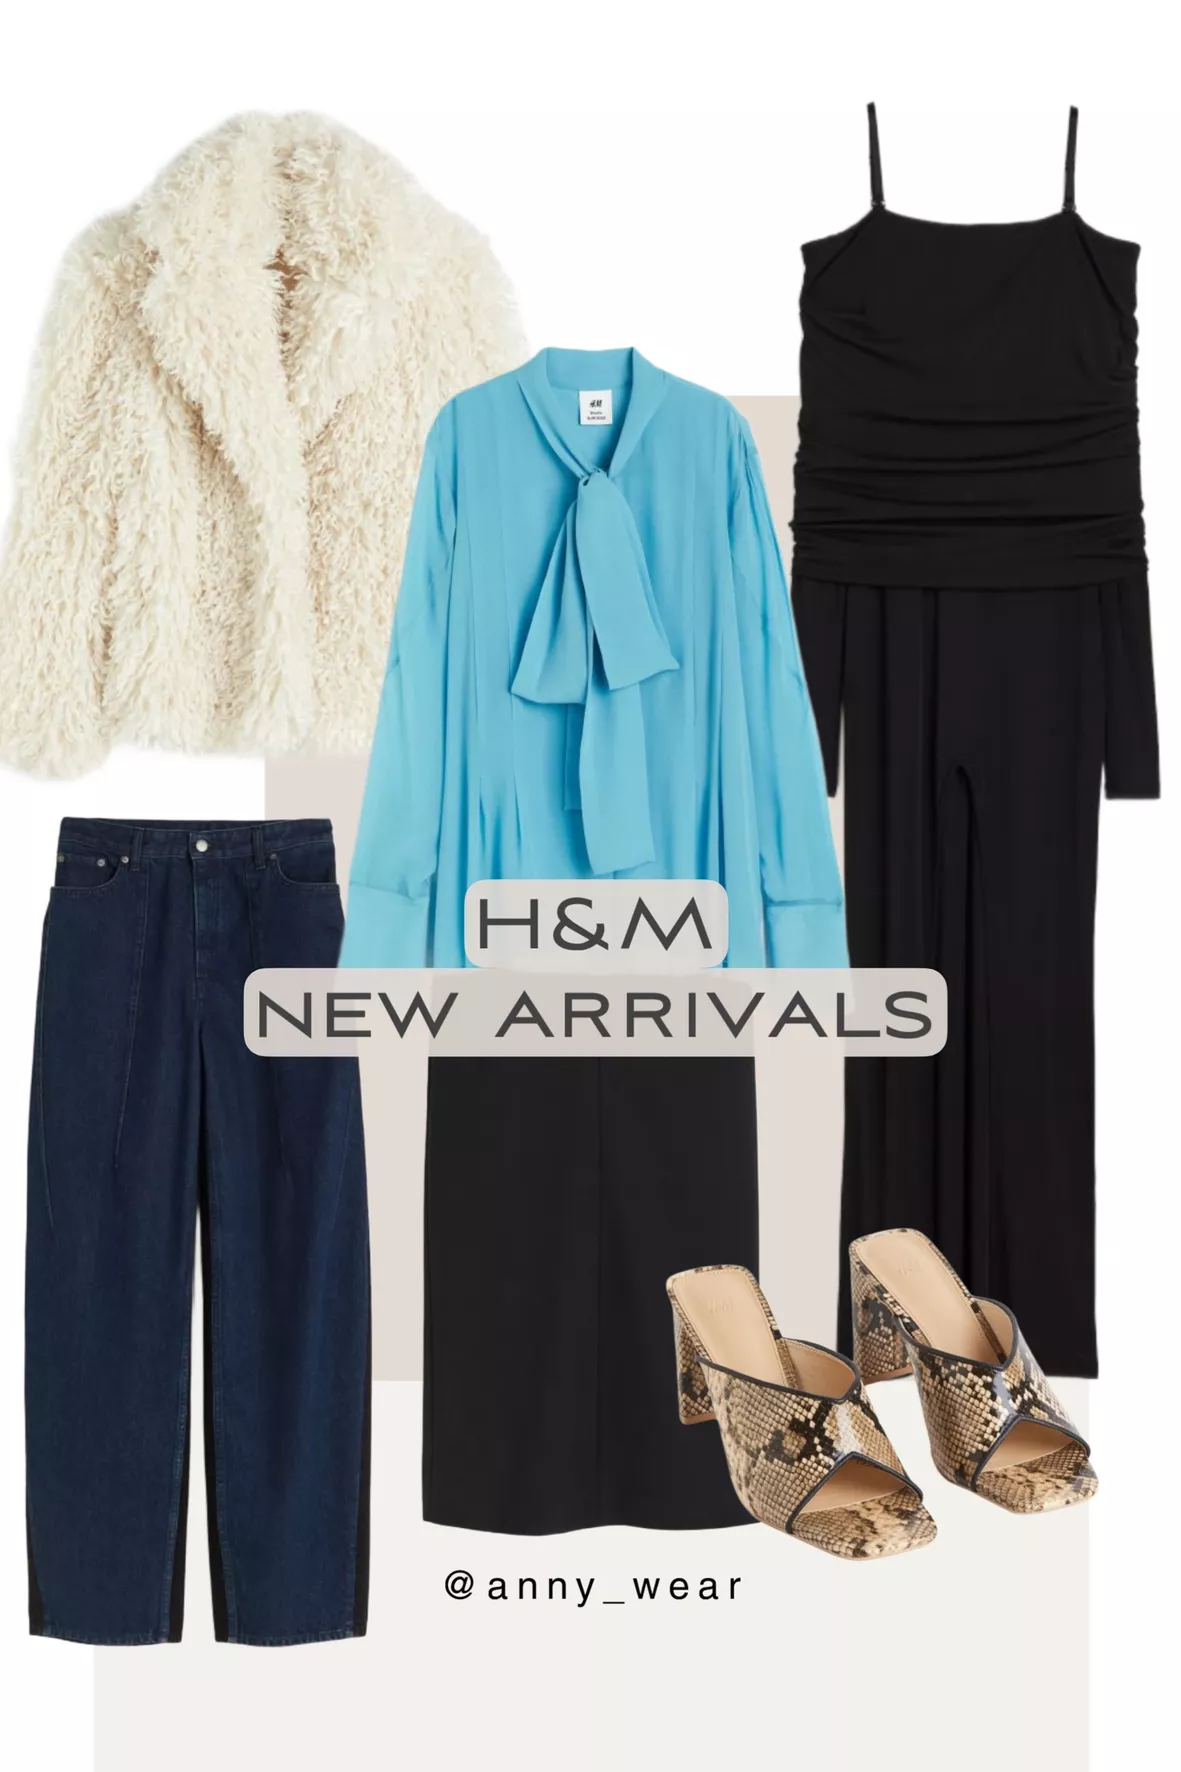 New Women's Clothing Arrivals - Latest Fashion Trends